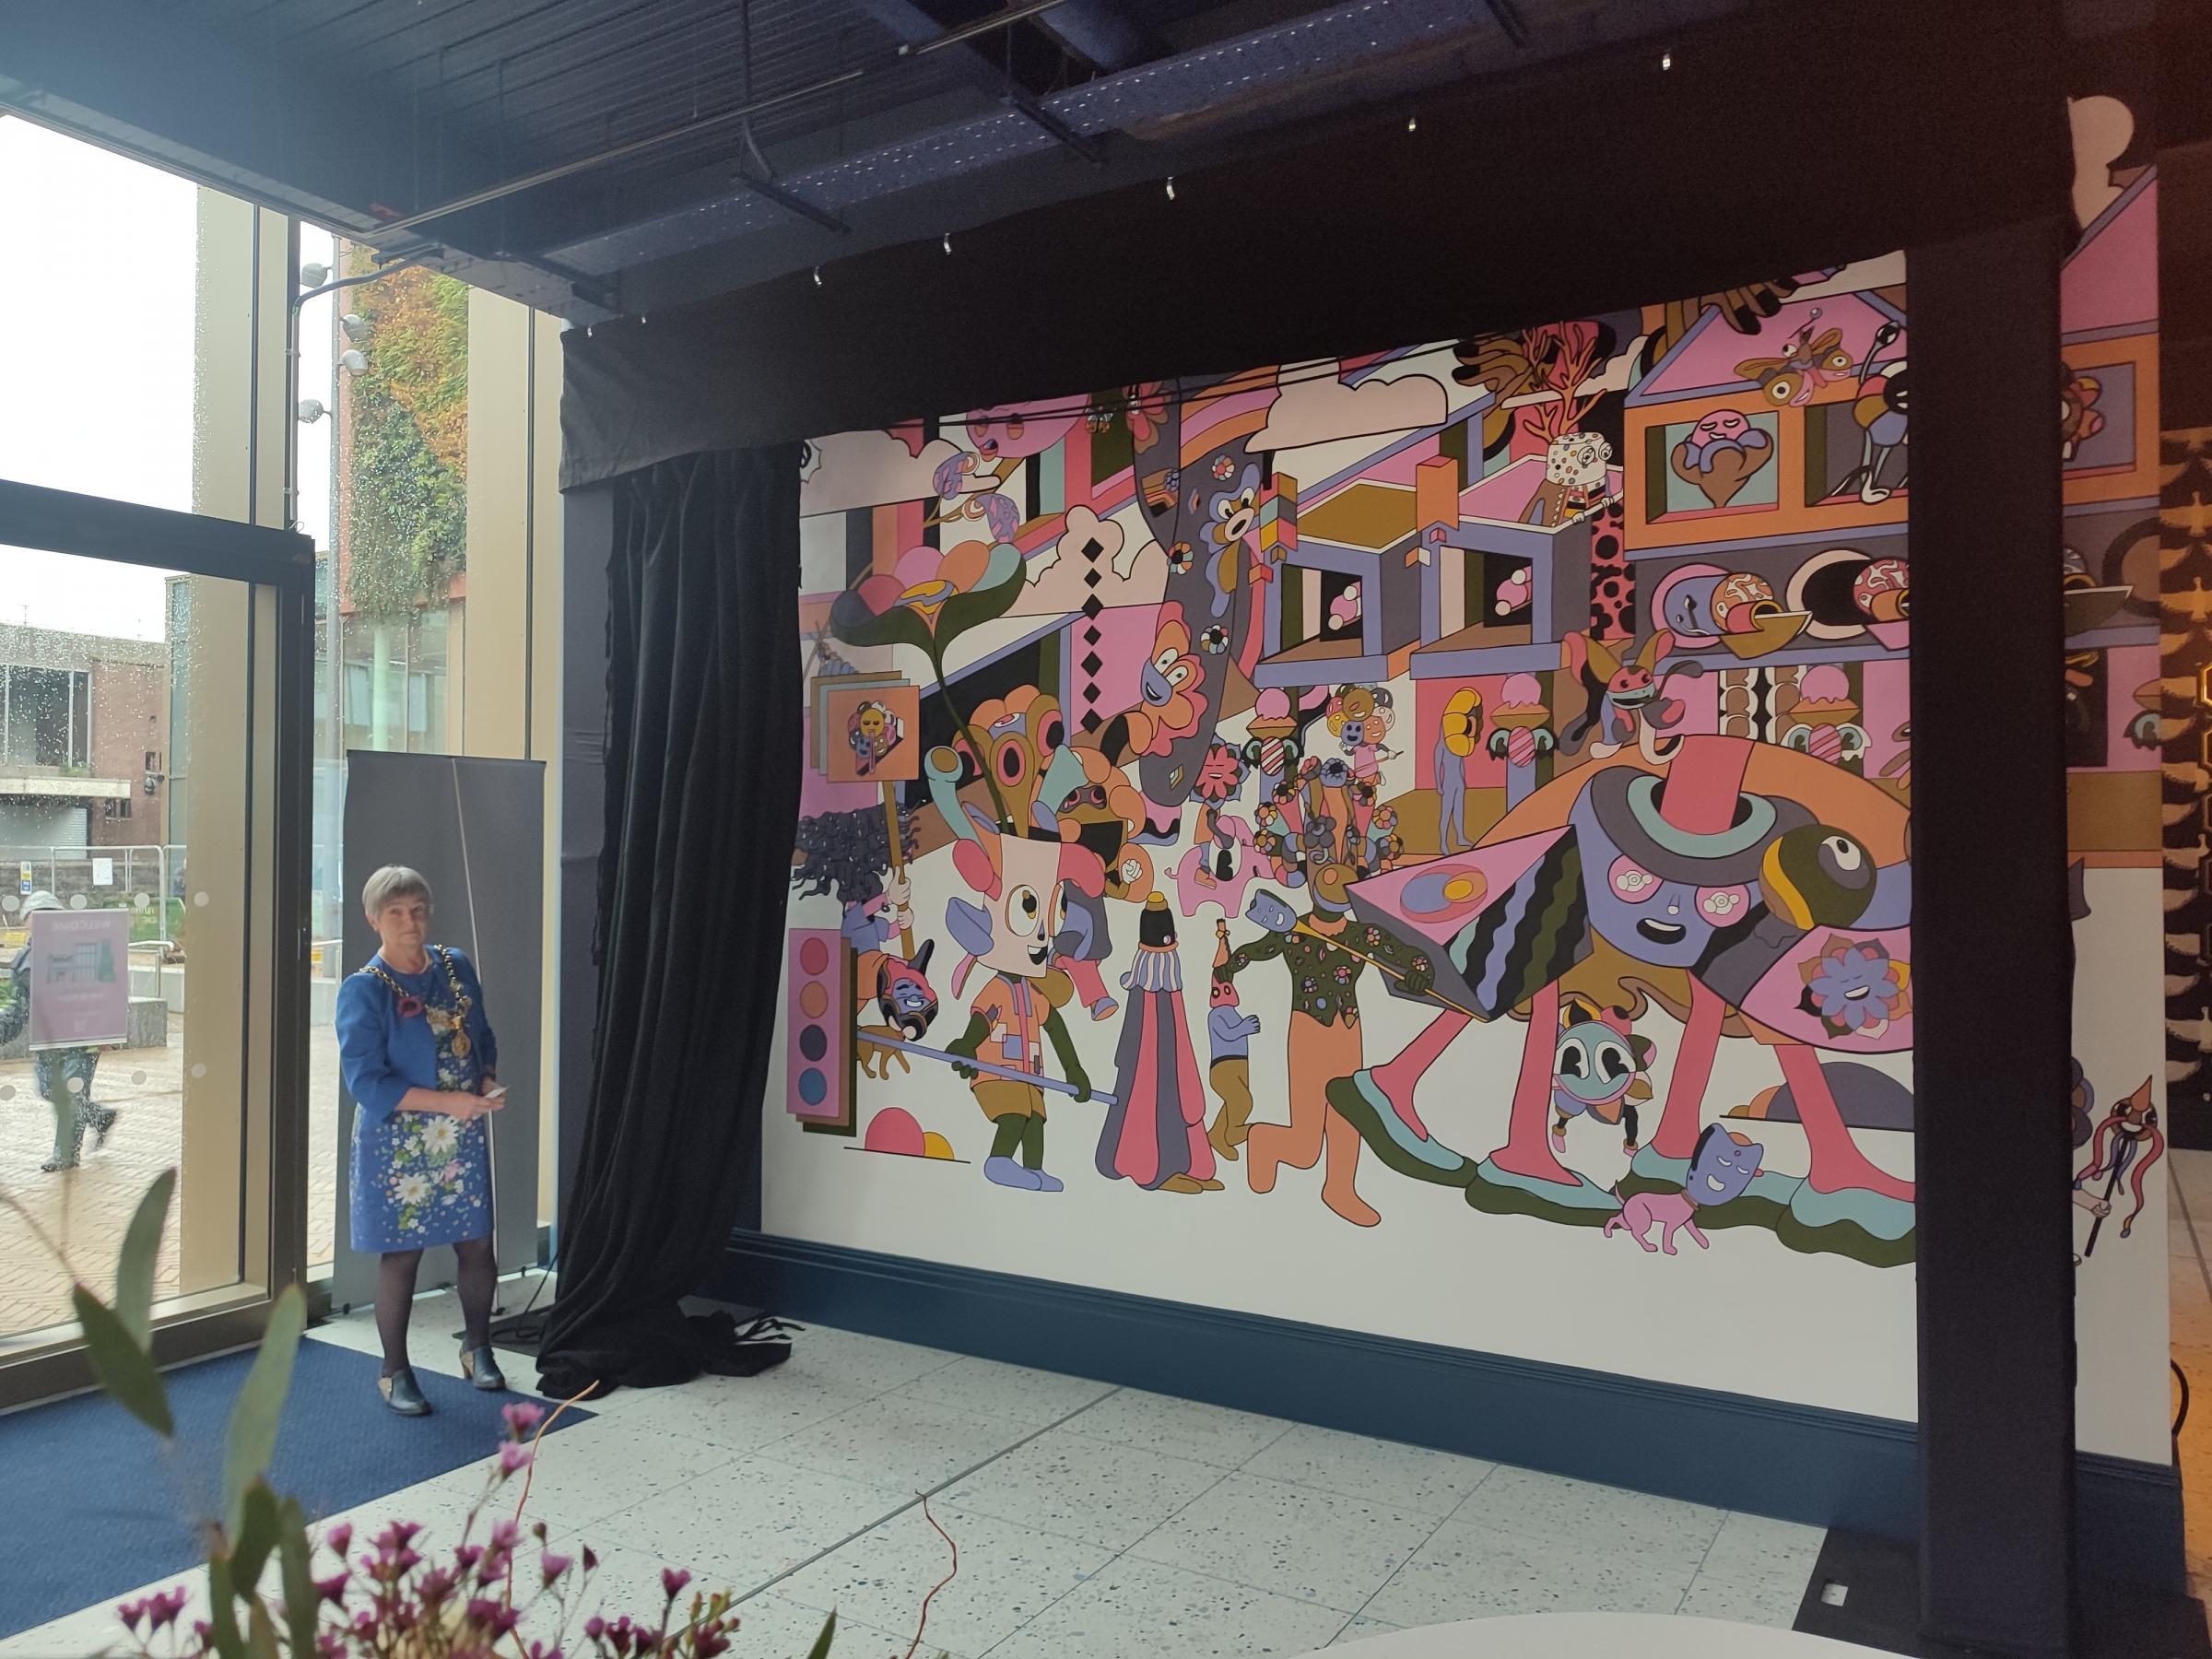 The mural at the Picturehouse Chester cinema, created by artist Murugiah, officially unveiled by Lord Mayor of Chester Cllr Sheila Little.